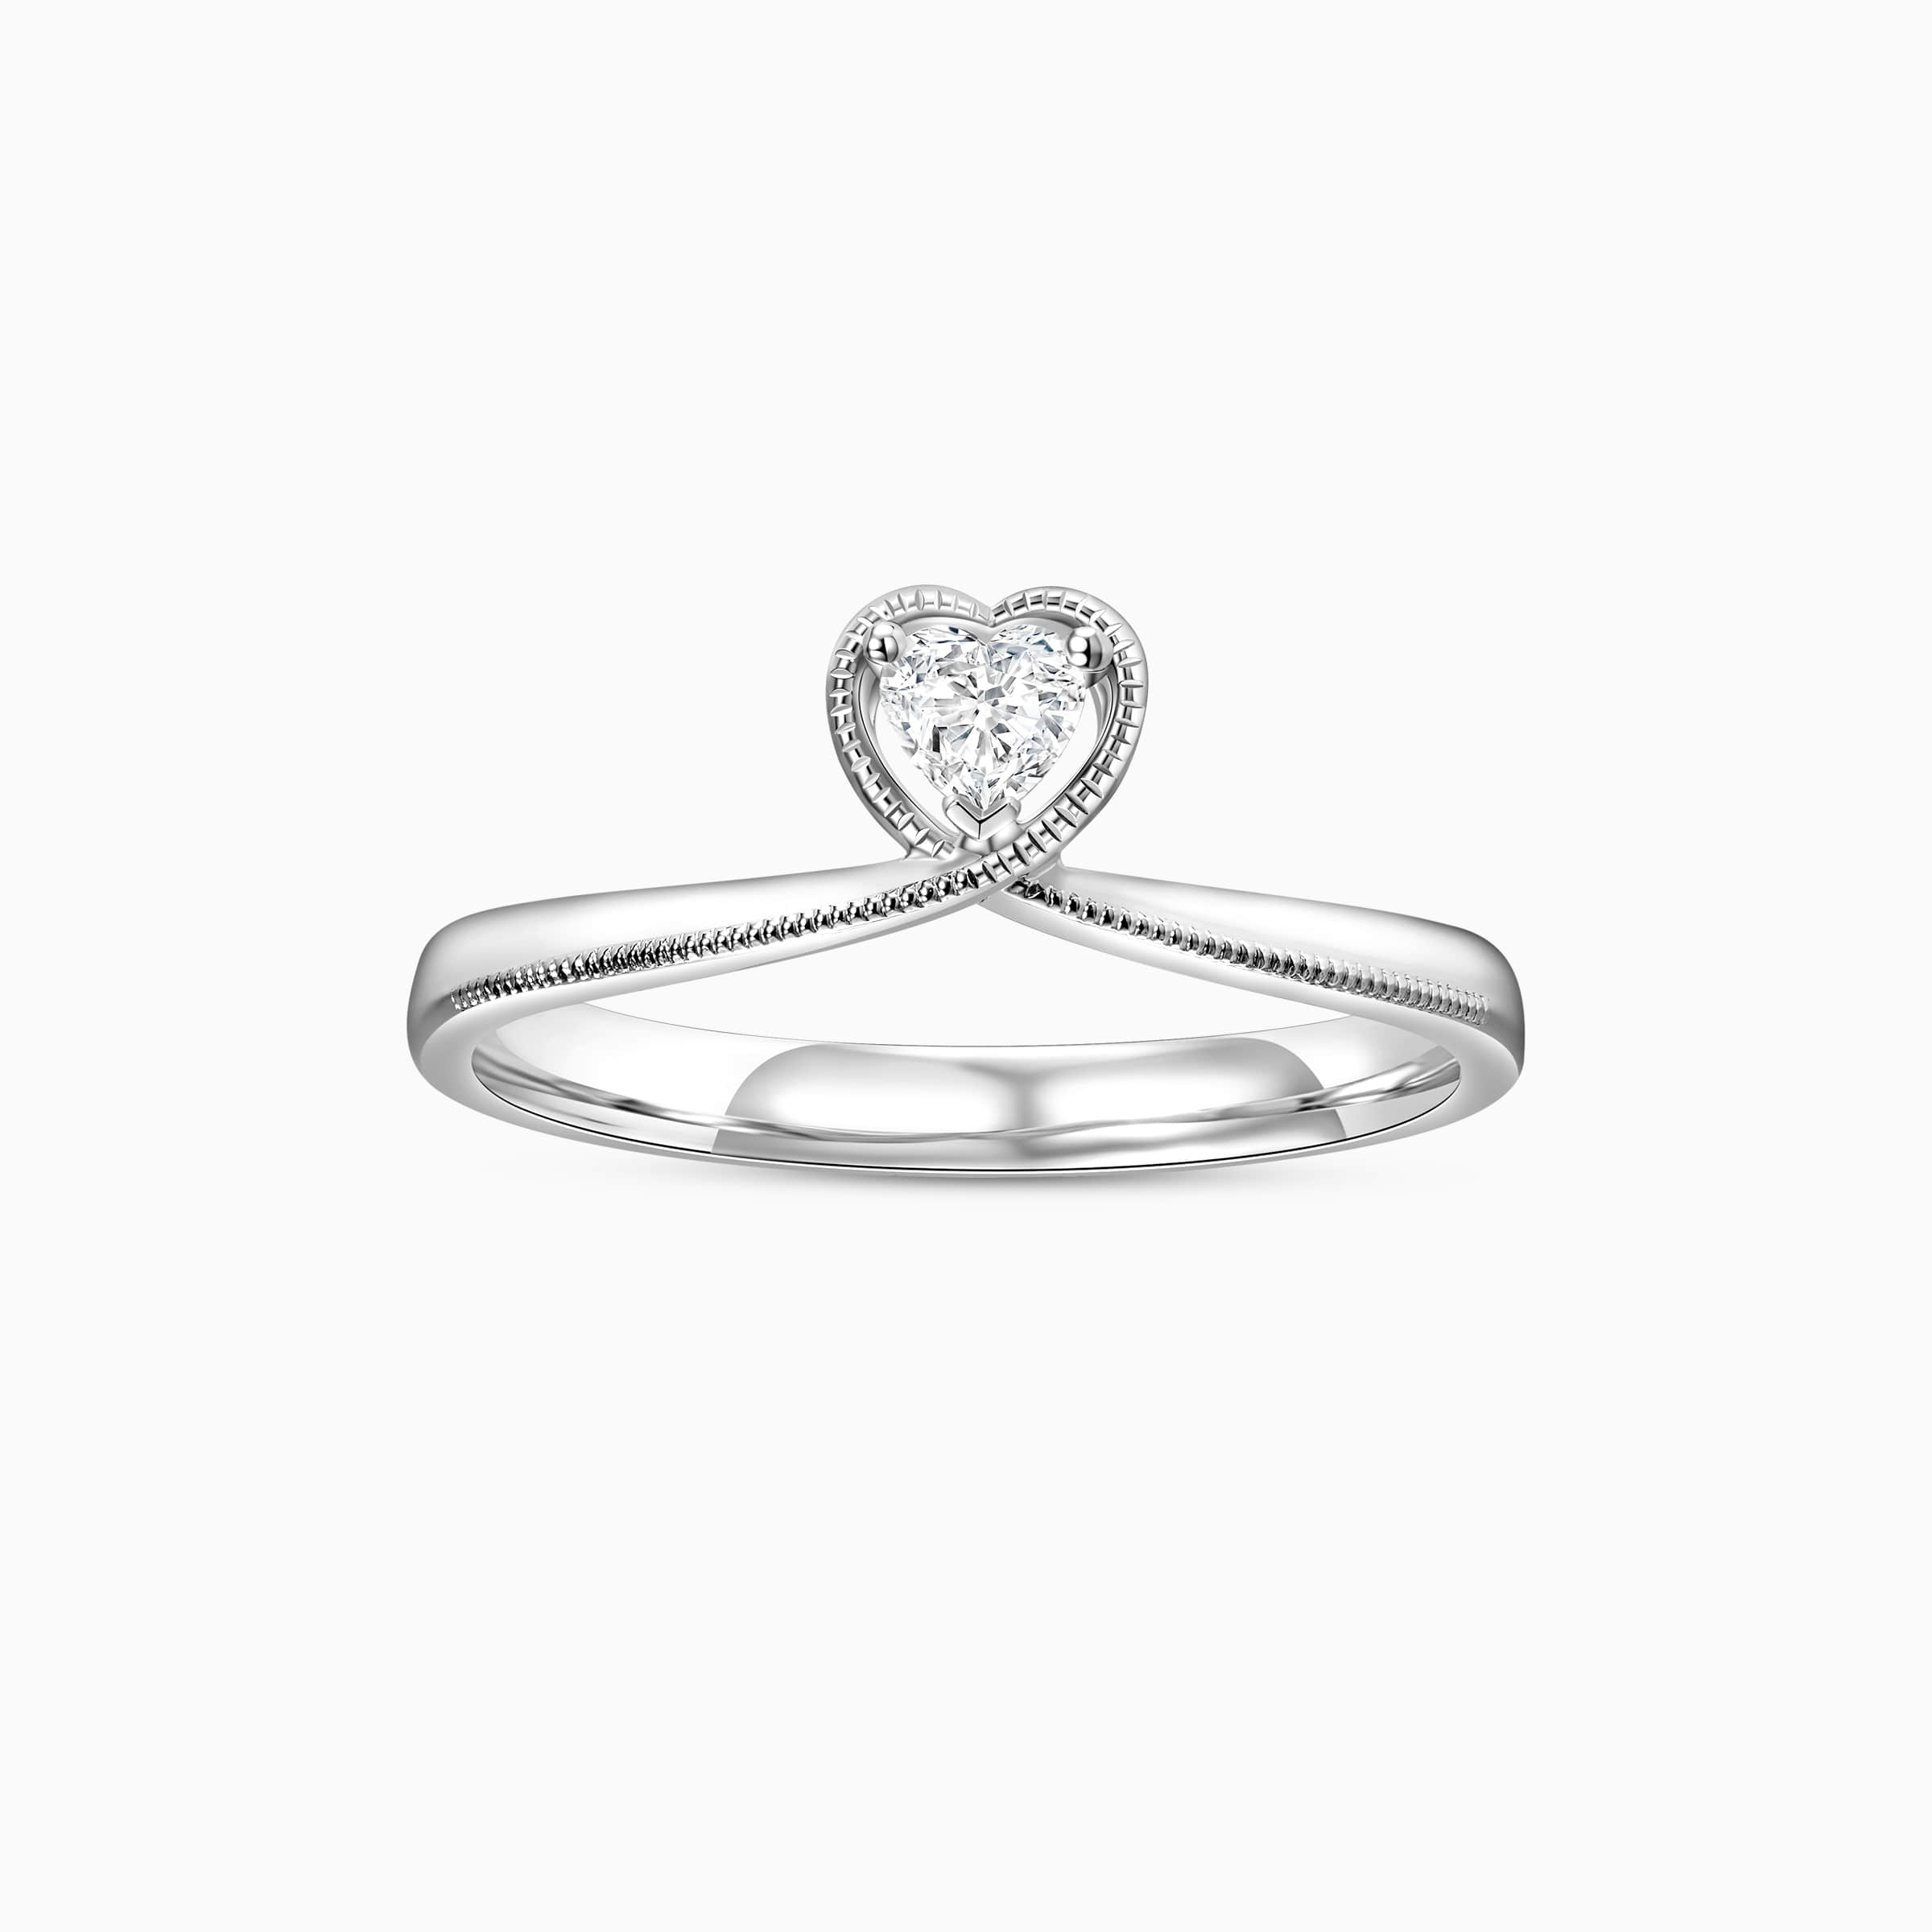 Darry Ring heart shaped promise ring white gold